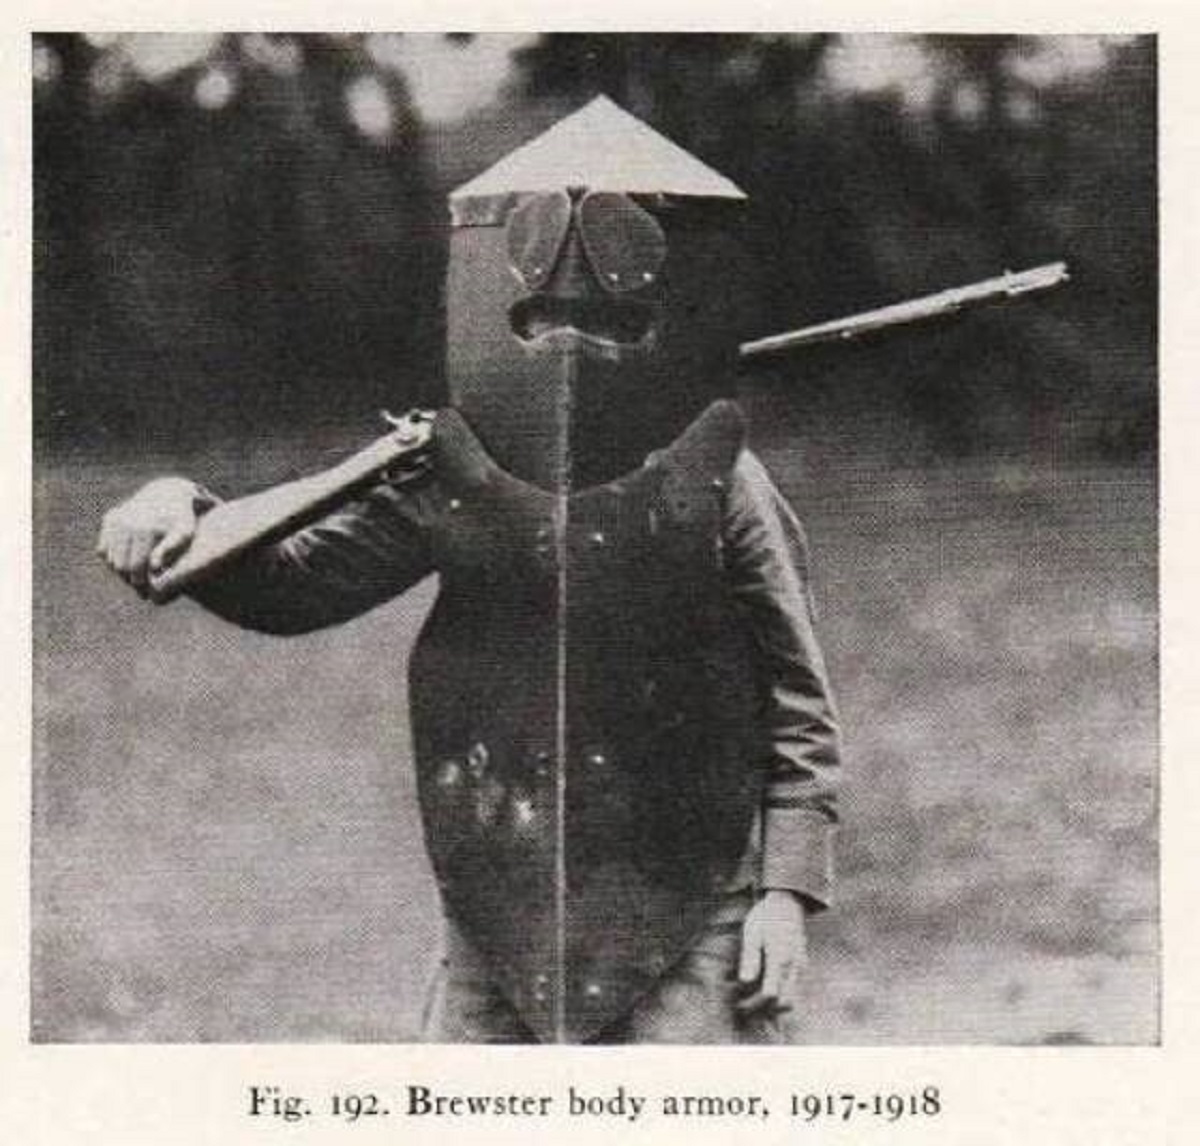 This the Brewster armor suit, one of the first fully functional suits of body armor designed for World War I combat: